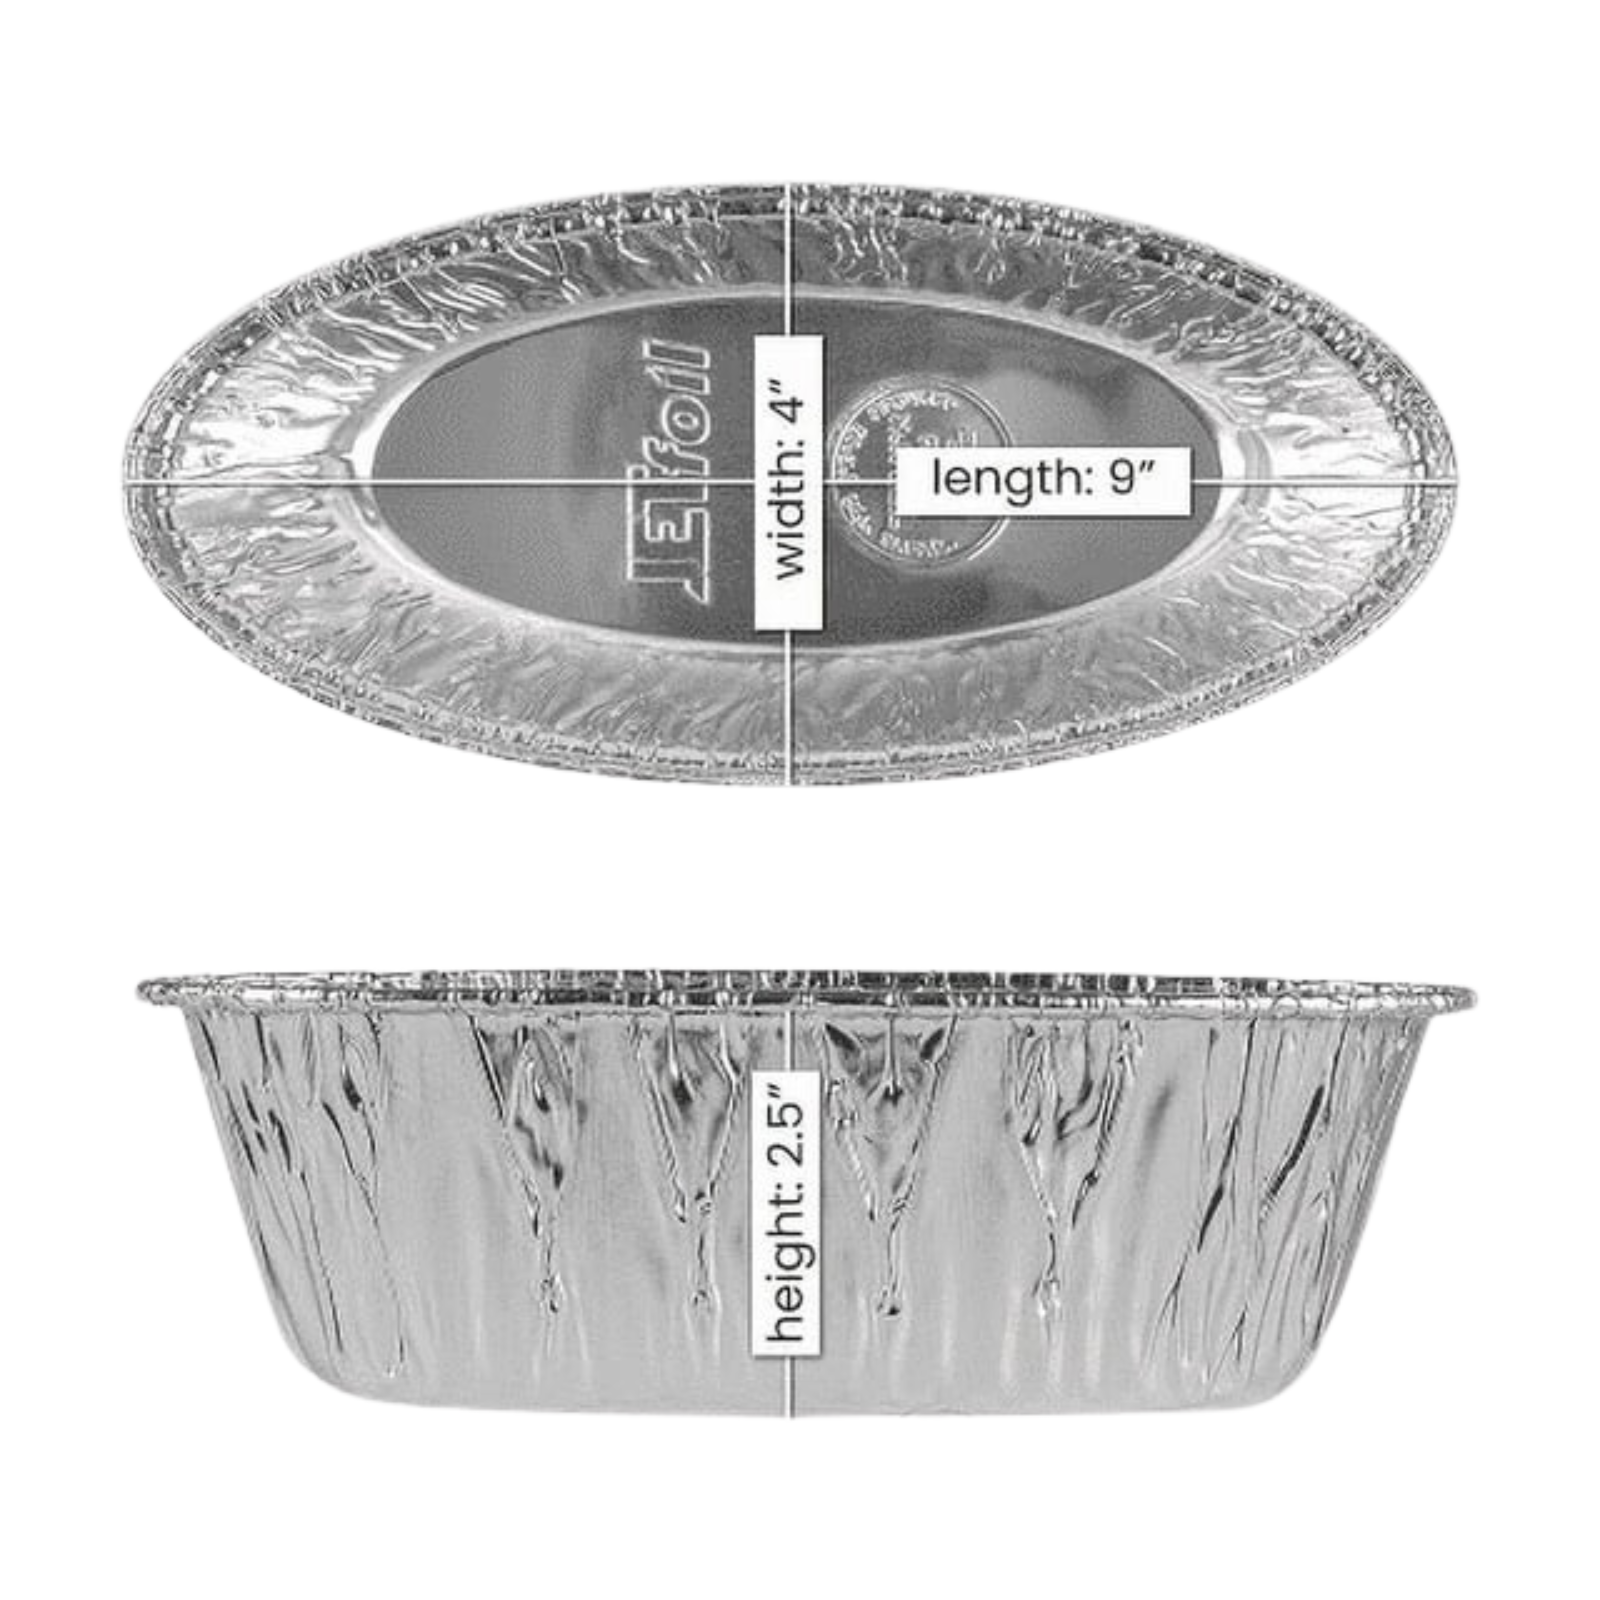 Disposable Aluminum 1lb Small Oval Loaf Pans: Ideal for Baking Disposable JetFoil   